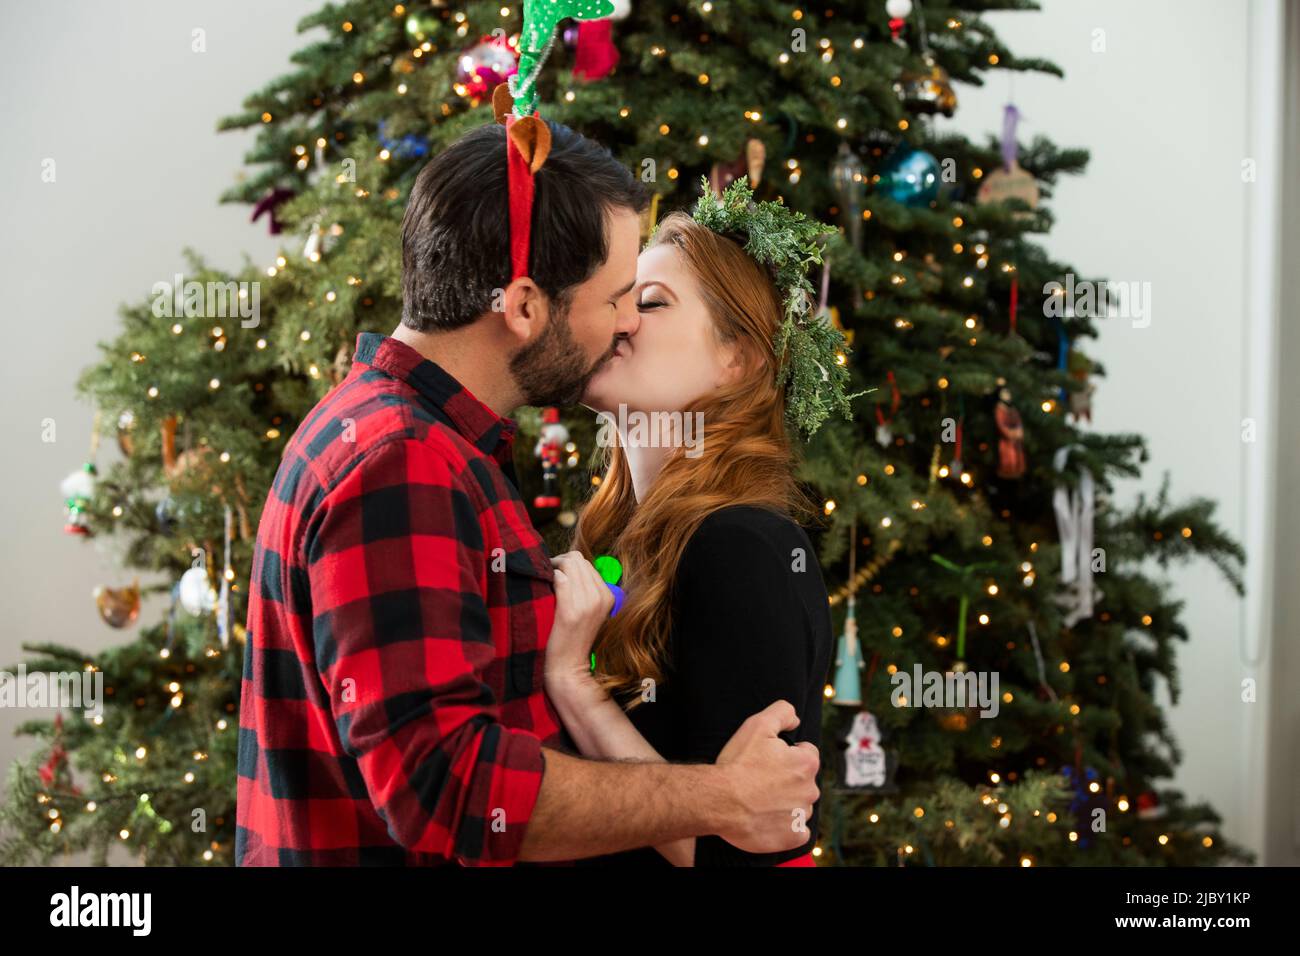 Affectionate young couple kissing under Christmas tree. Stock Photo